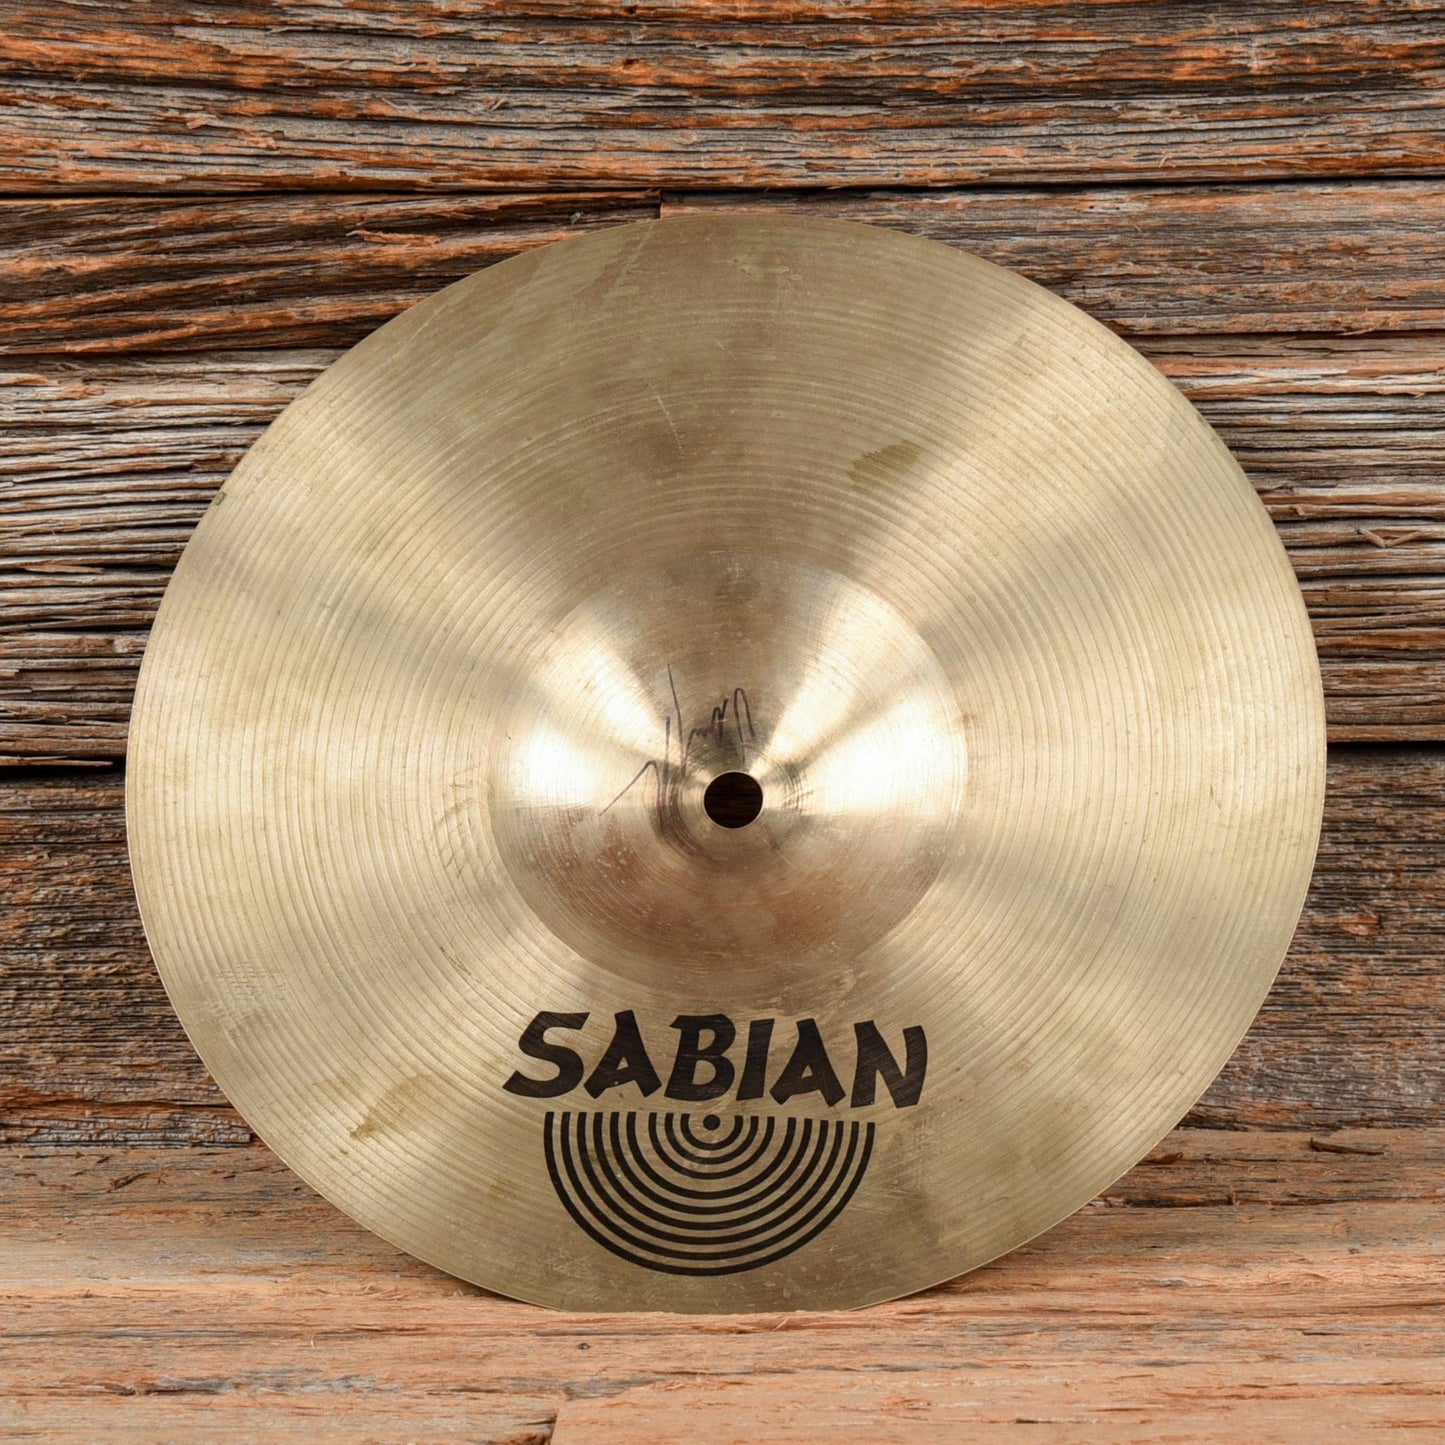 Sabian HH 10" Splash Cymbal Used Drums and Percussion